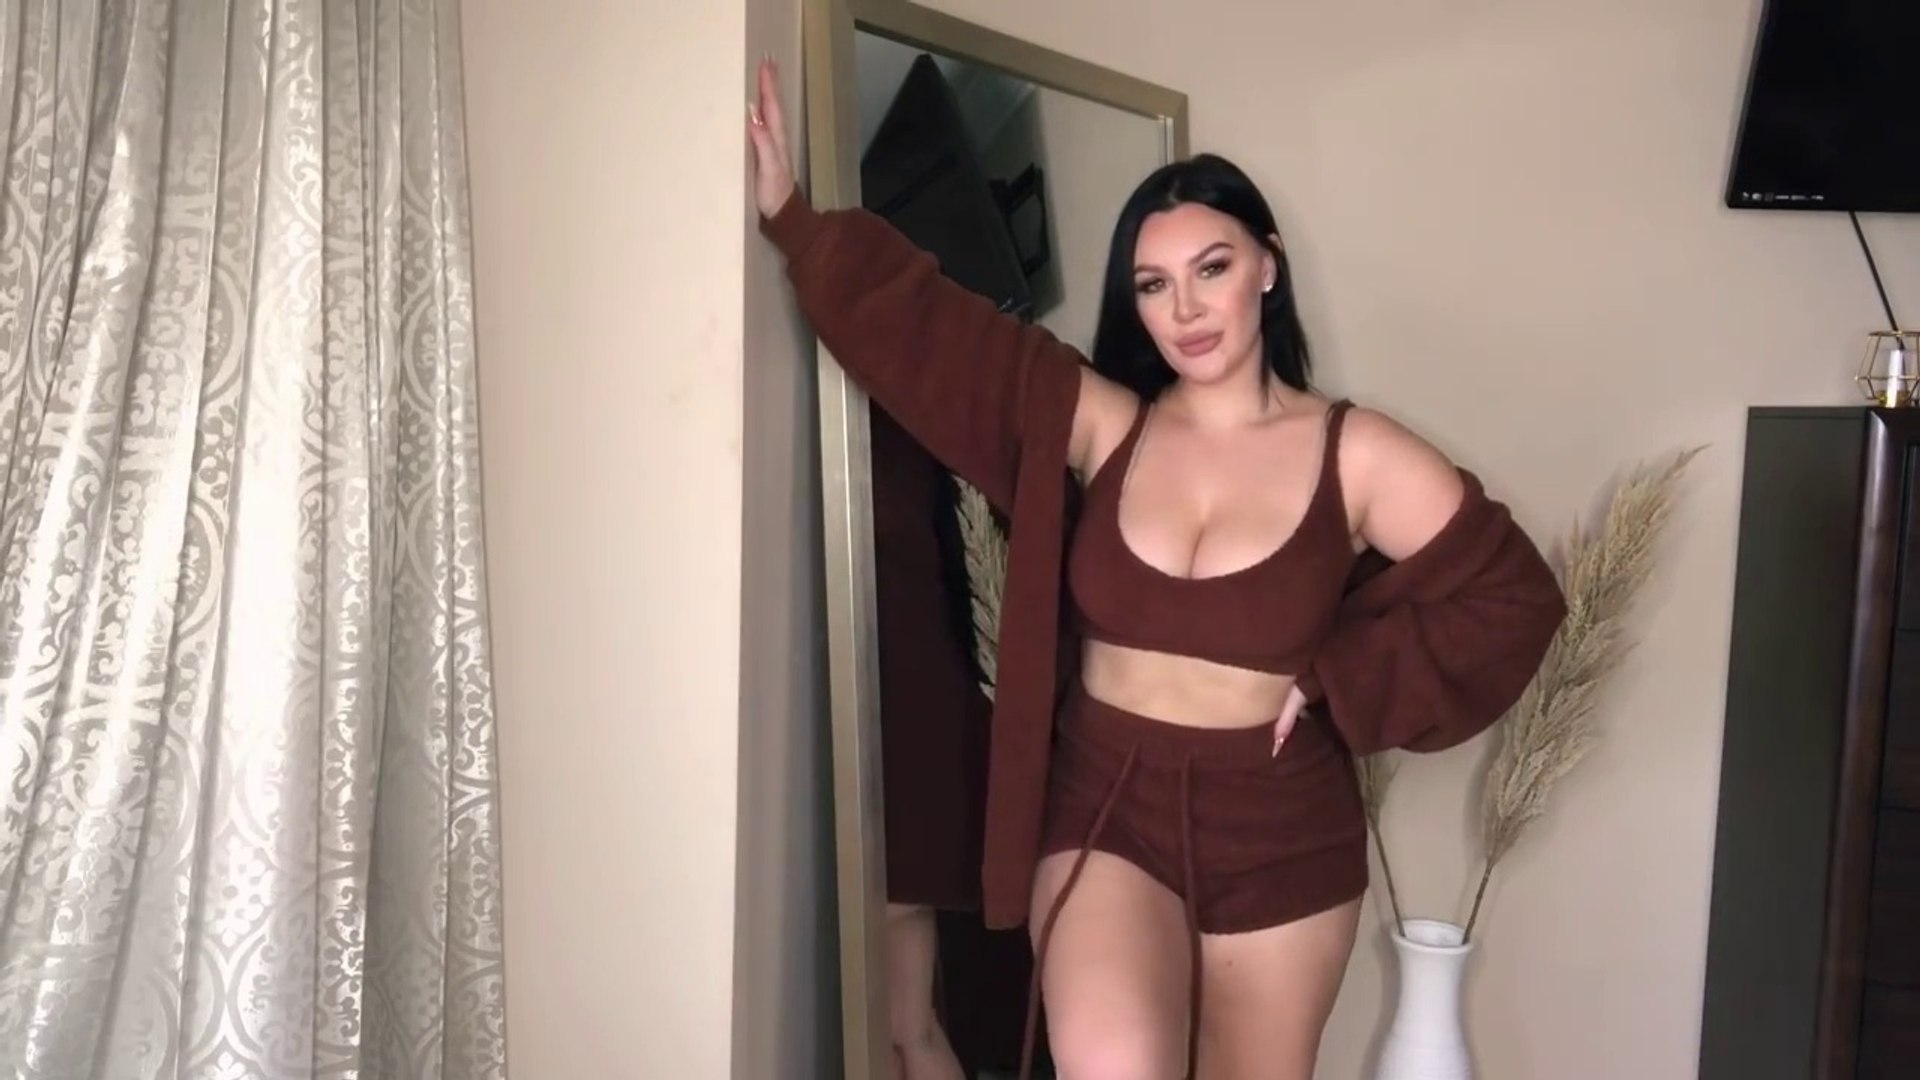 lounge lingerie try on haul!!